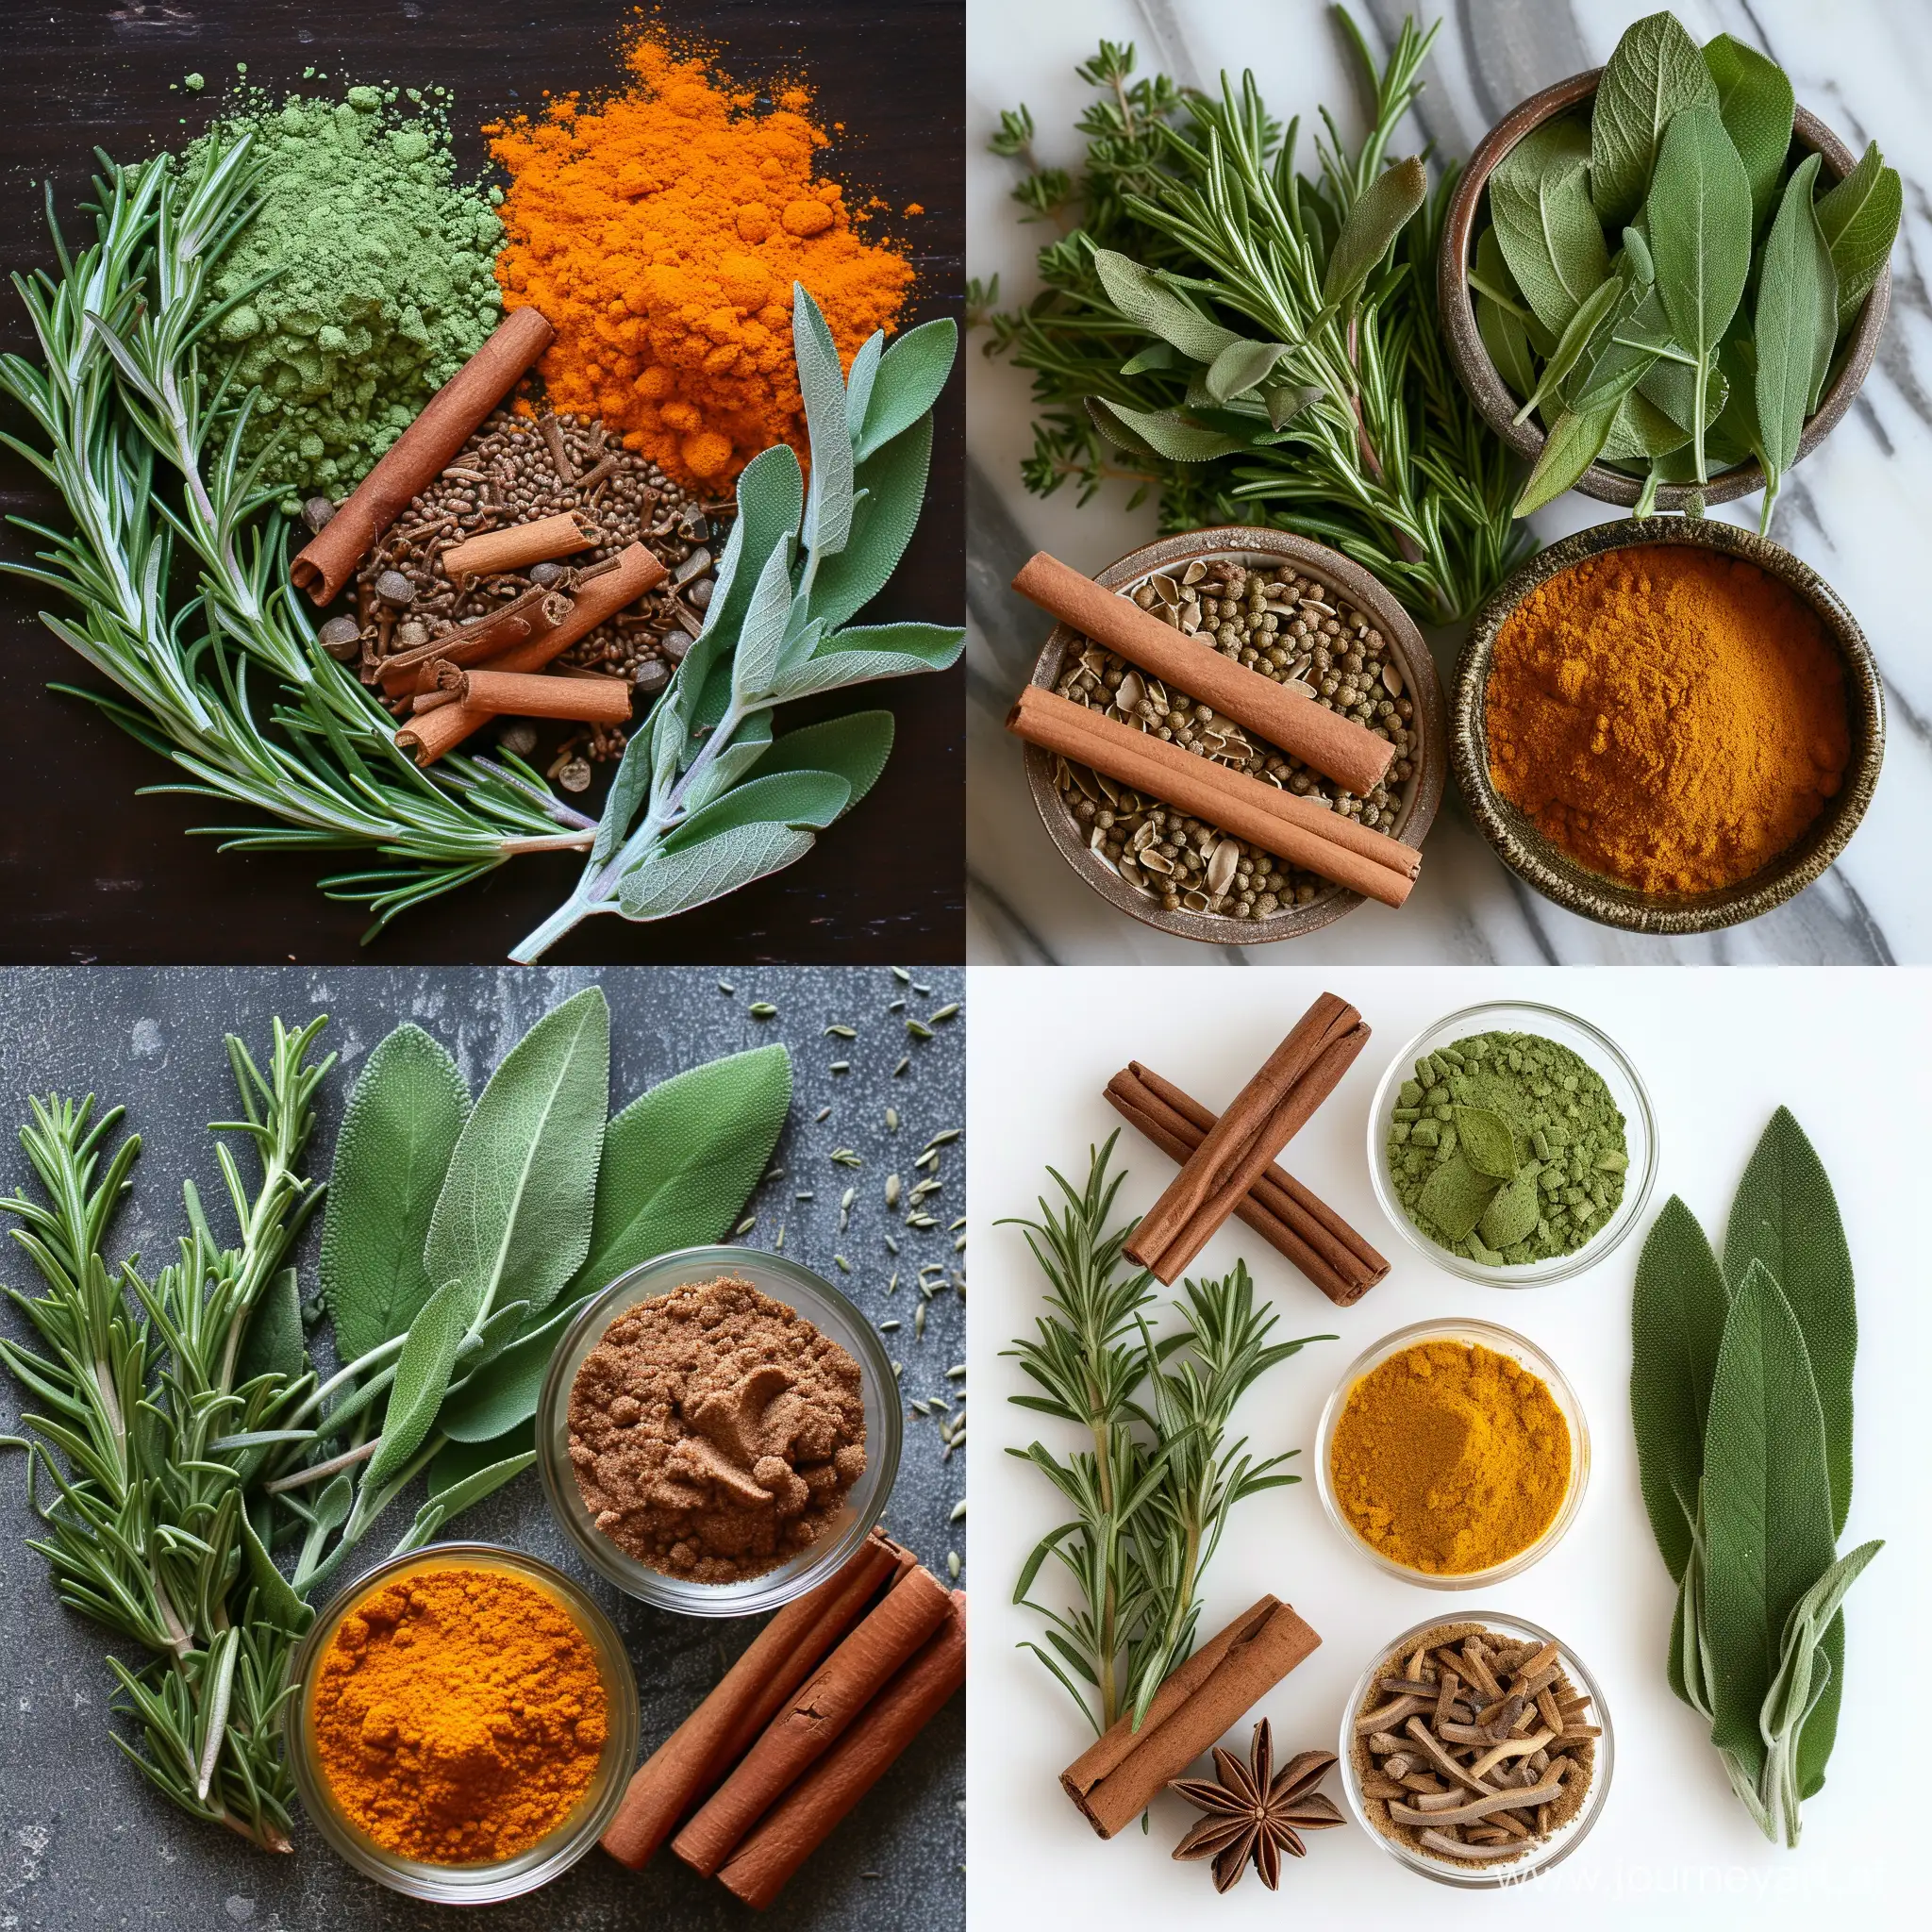 Exquisite-Display-of-Culinary-Spices-Moringa-Rosemary-Curry-Powder-Cinnamon-and-Sage